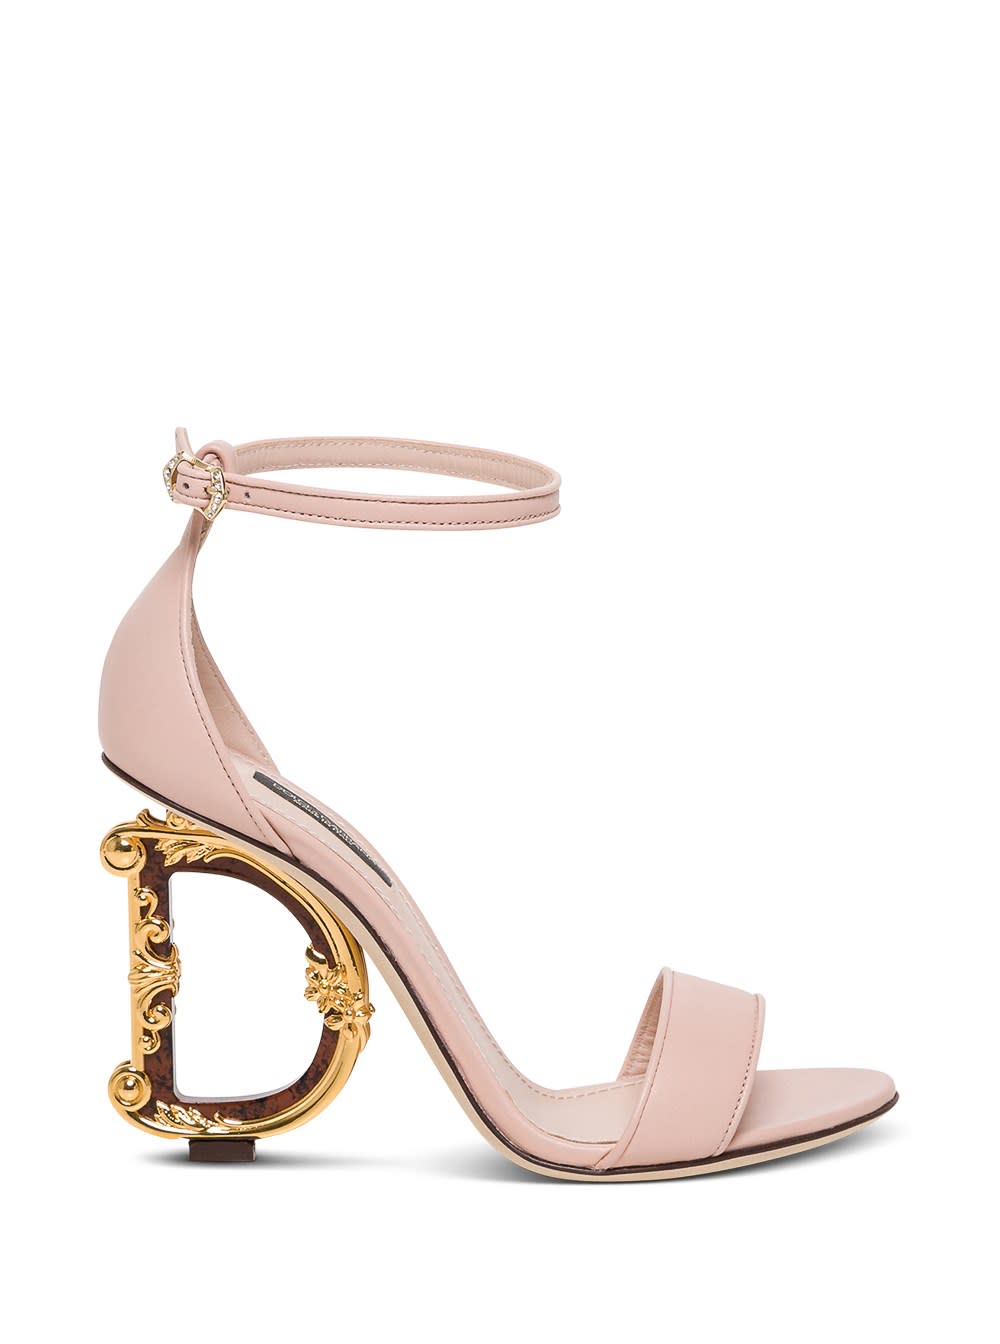 Dolce & Gabbana Devotion Sandals In Pink Leather